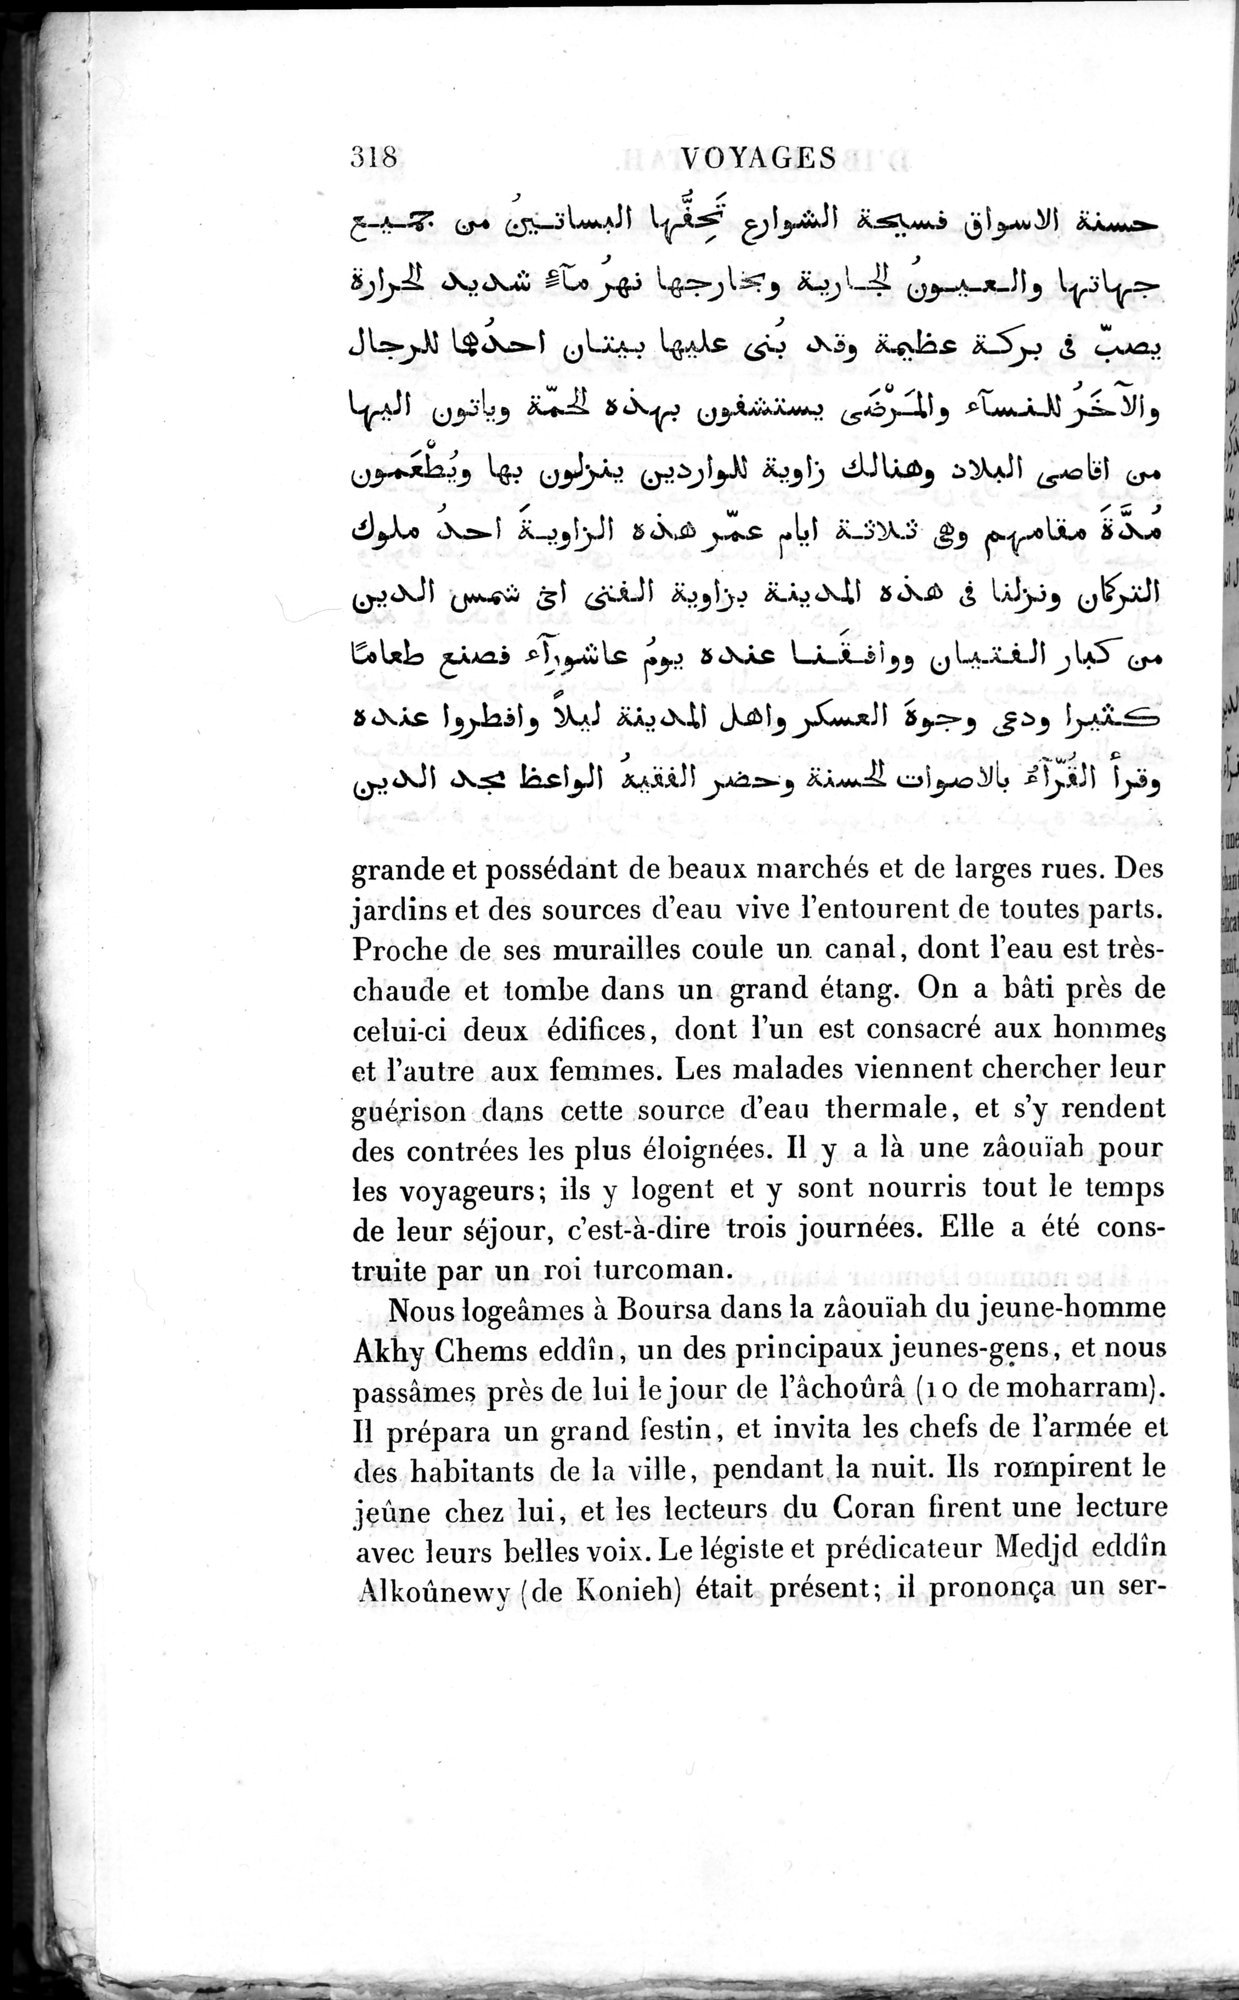 Voyages d'Ibn Batoutah : vol.2 / Page 346 (Grayscale High Resolution Image)